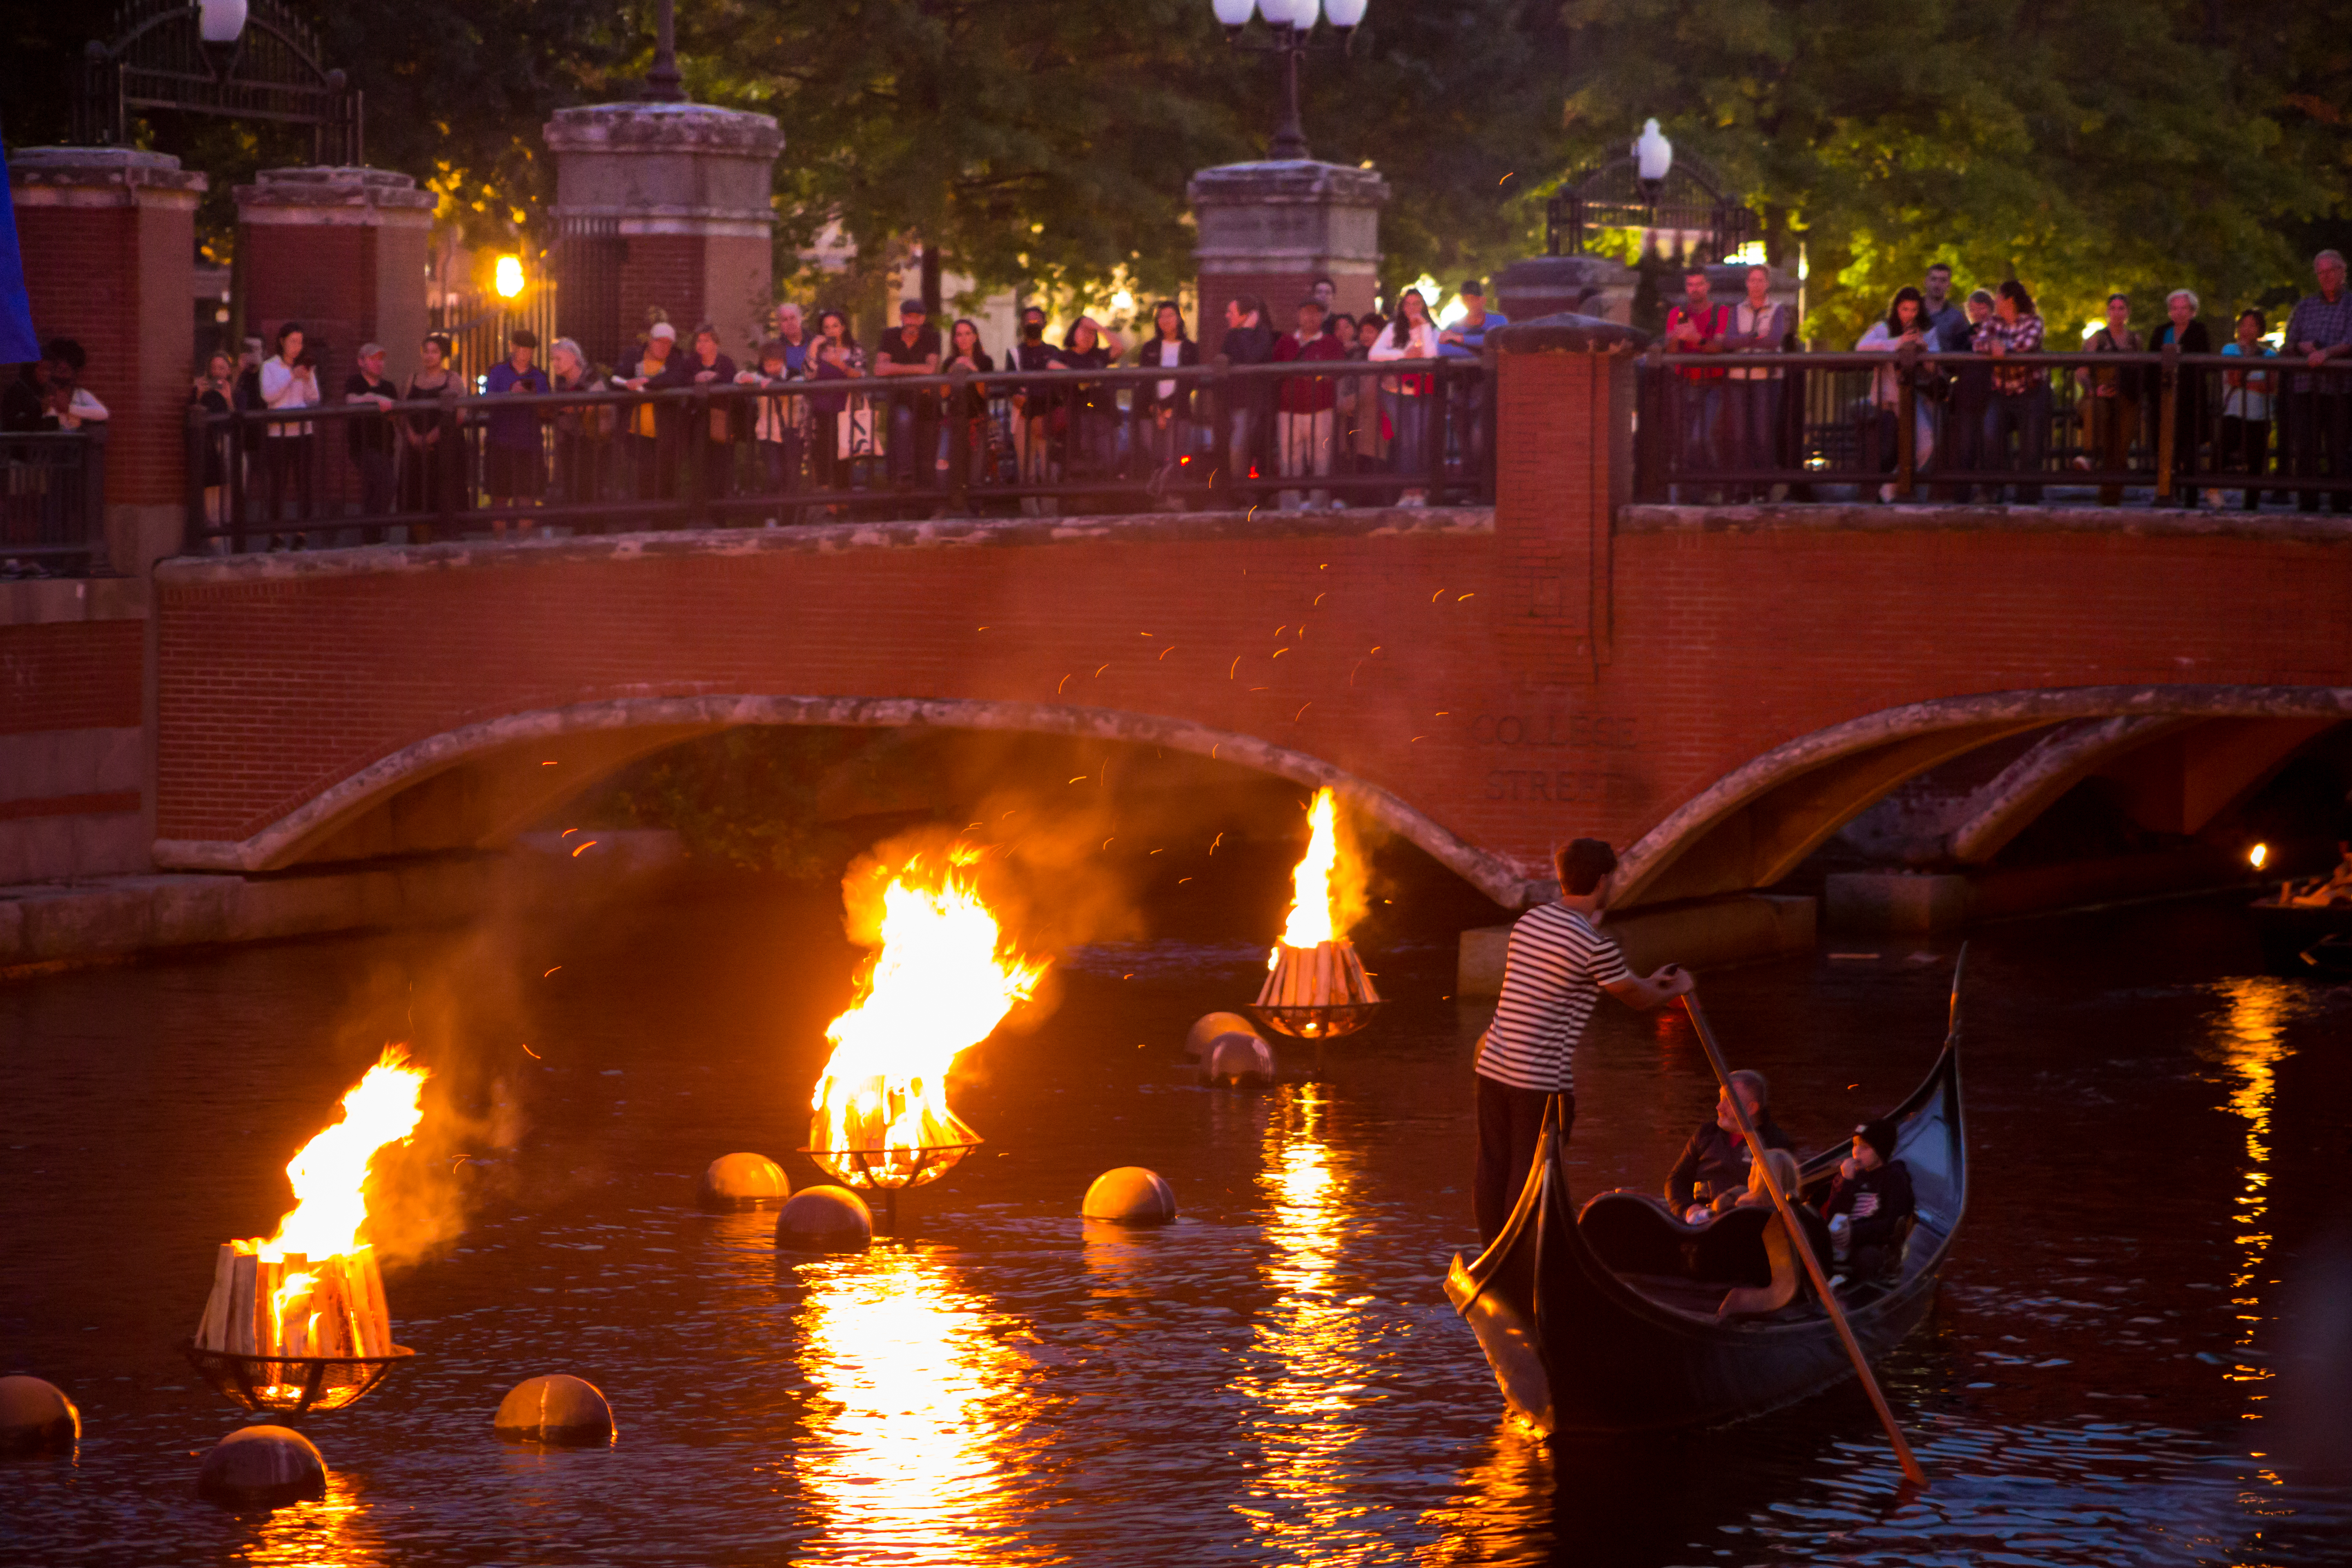 /Providence%20WaterFire.%20At%20night%2C%20a%20crowd%20gathers%20on%20the%20College%20Street%20bridge%20overlooking%20the%20Providence%20River.%20The%20river%20is%20lit%20by%20burning%20braziers.%20A%20man%20rows%20a%20gondola%20under%20the%20bridge.